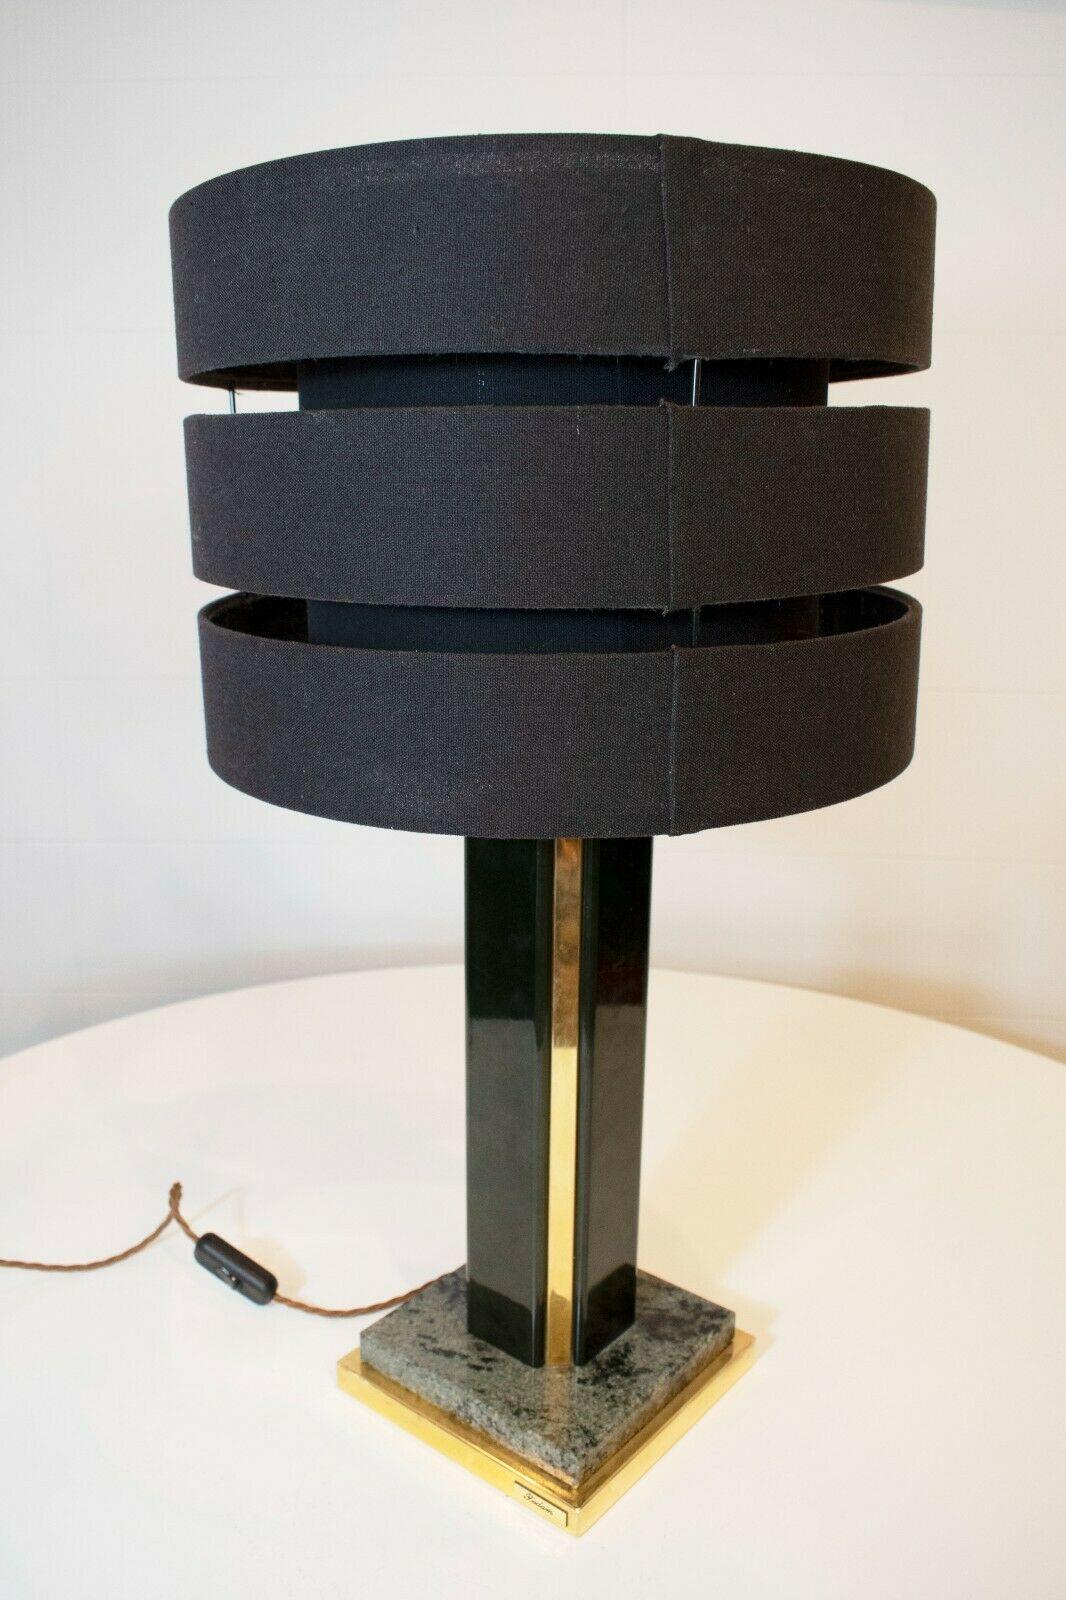 A super sleek and stylish 1970's Italian brass and marble lamp by Fedam.

Set upon a marble base, this lamp features a black lacquered stem with brass detailing.